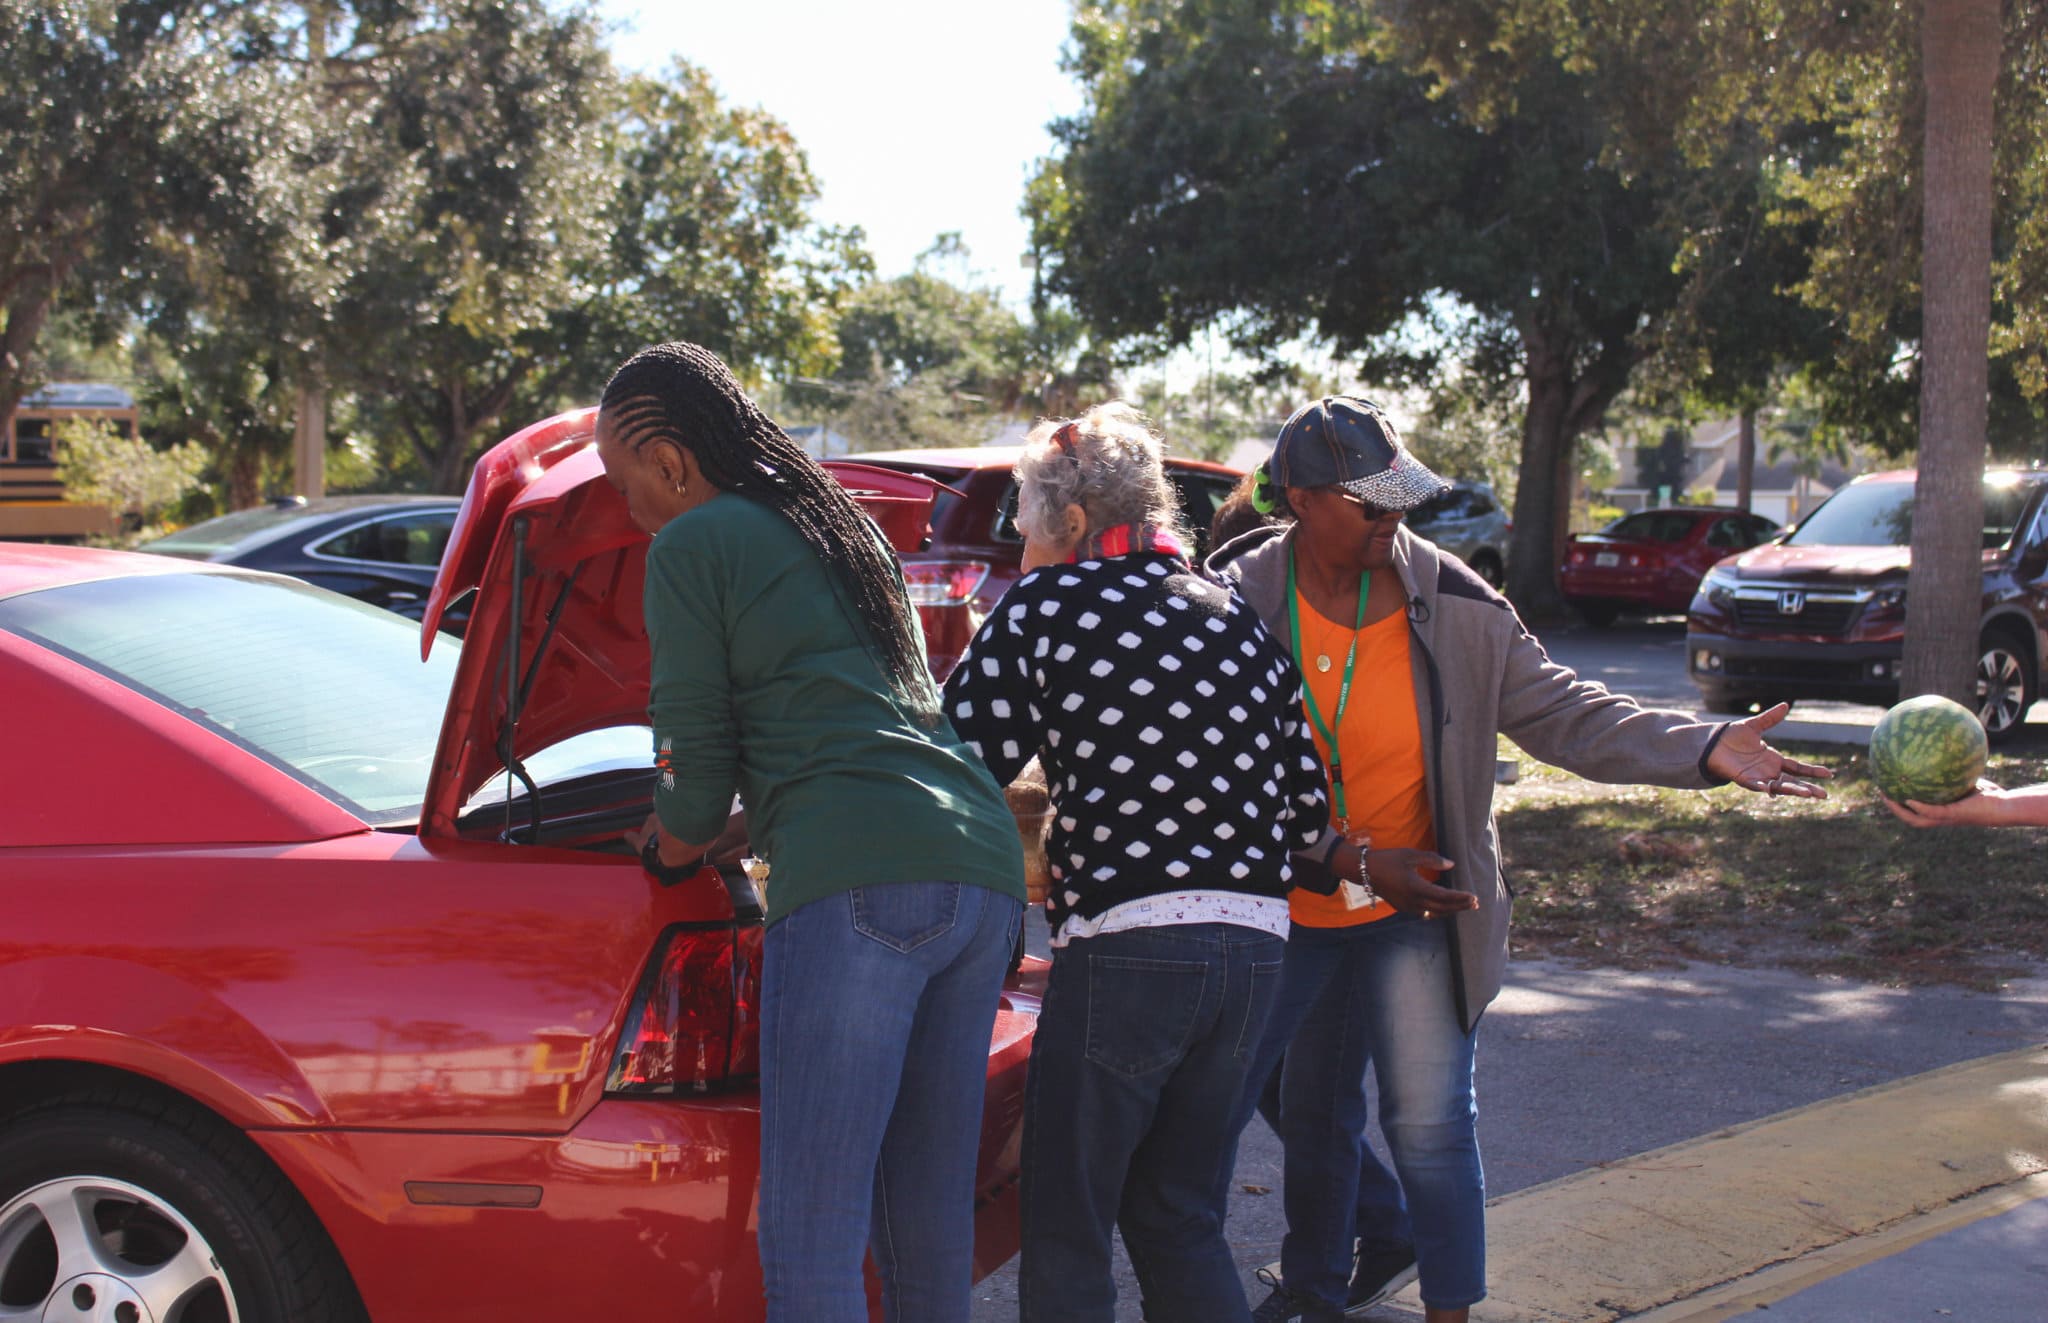 Volunteers load food into trunk of red car.